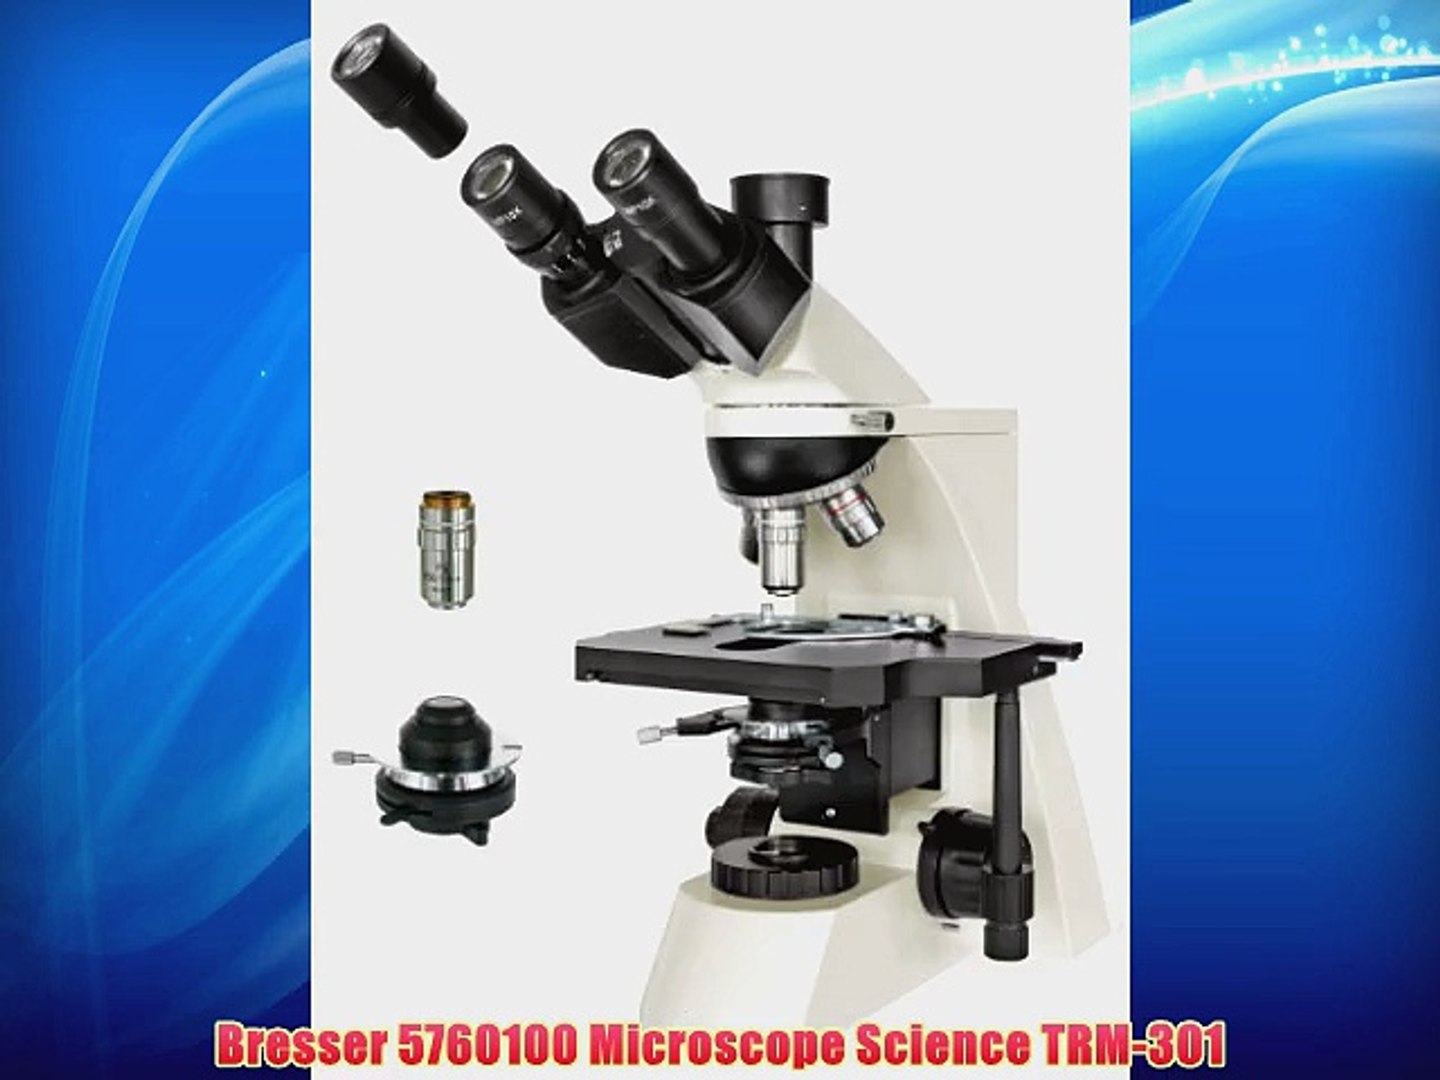 Bresser 5760100 Microscope Science TRM-301 - video Dailymotion